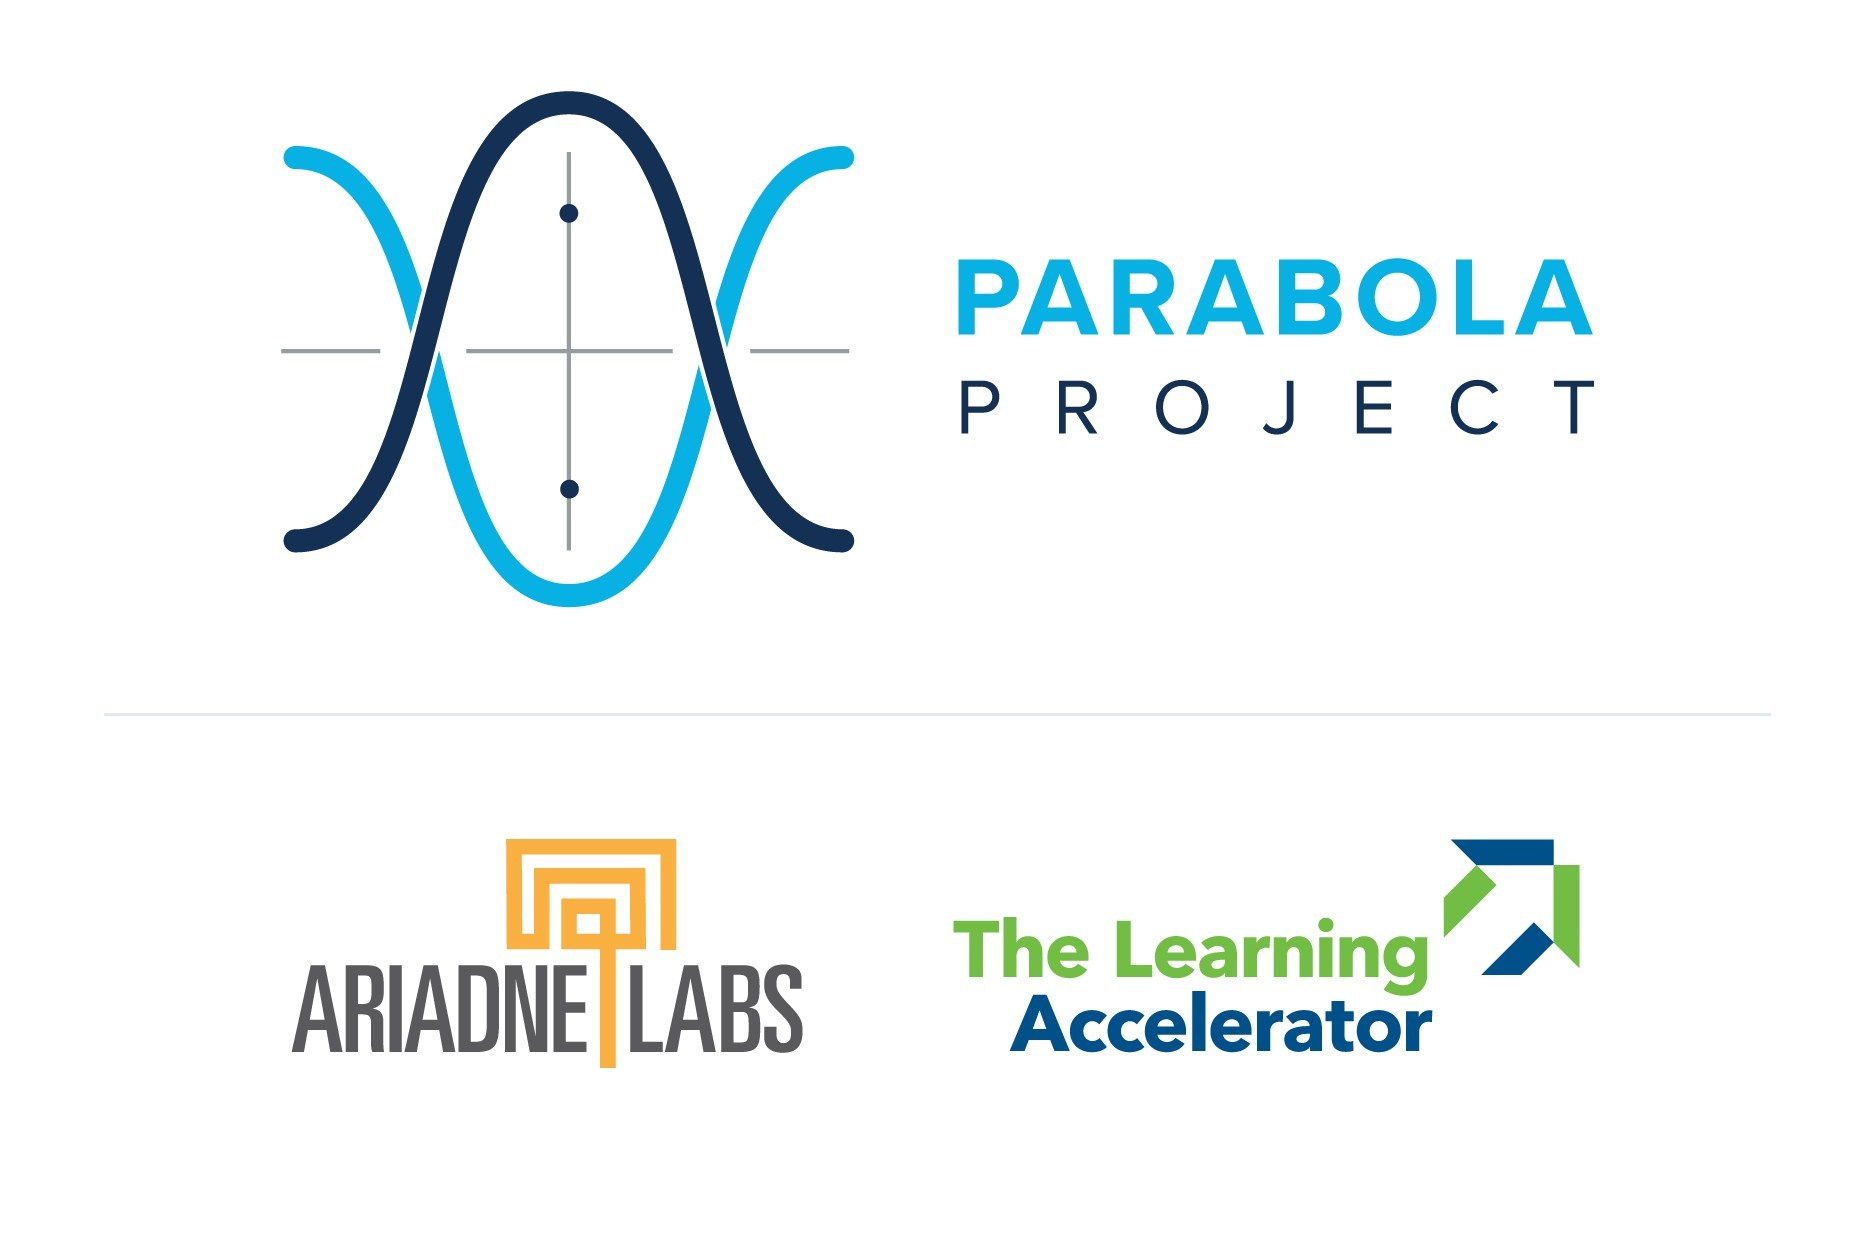 Ariadne Labs and The Learning Accelerator Launch ‘The Parabola Project’ to Help Schools Minimize COVID-19 Health Risks while Maximizing Learning